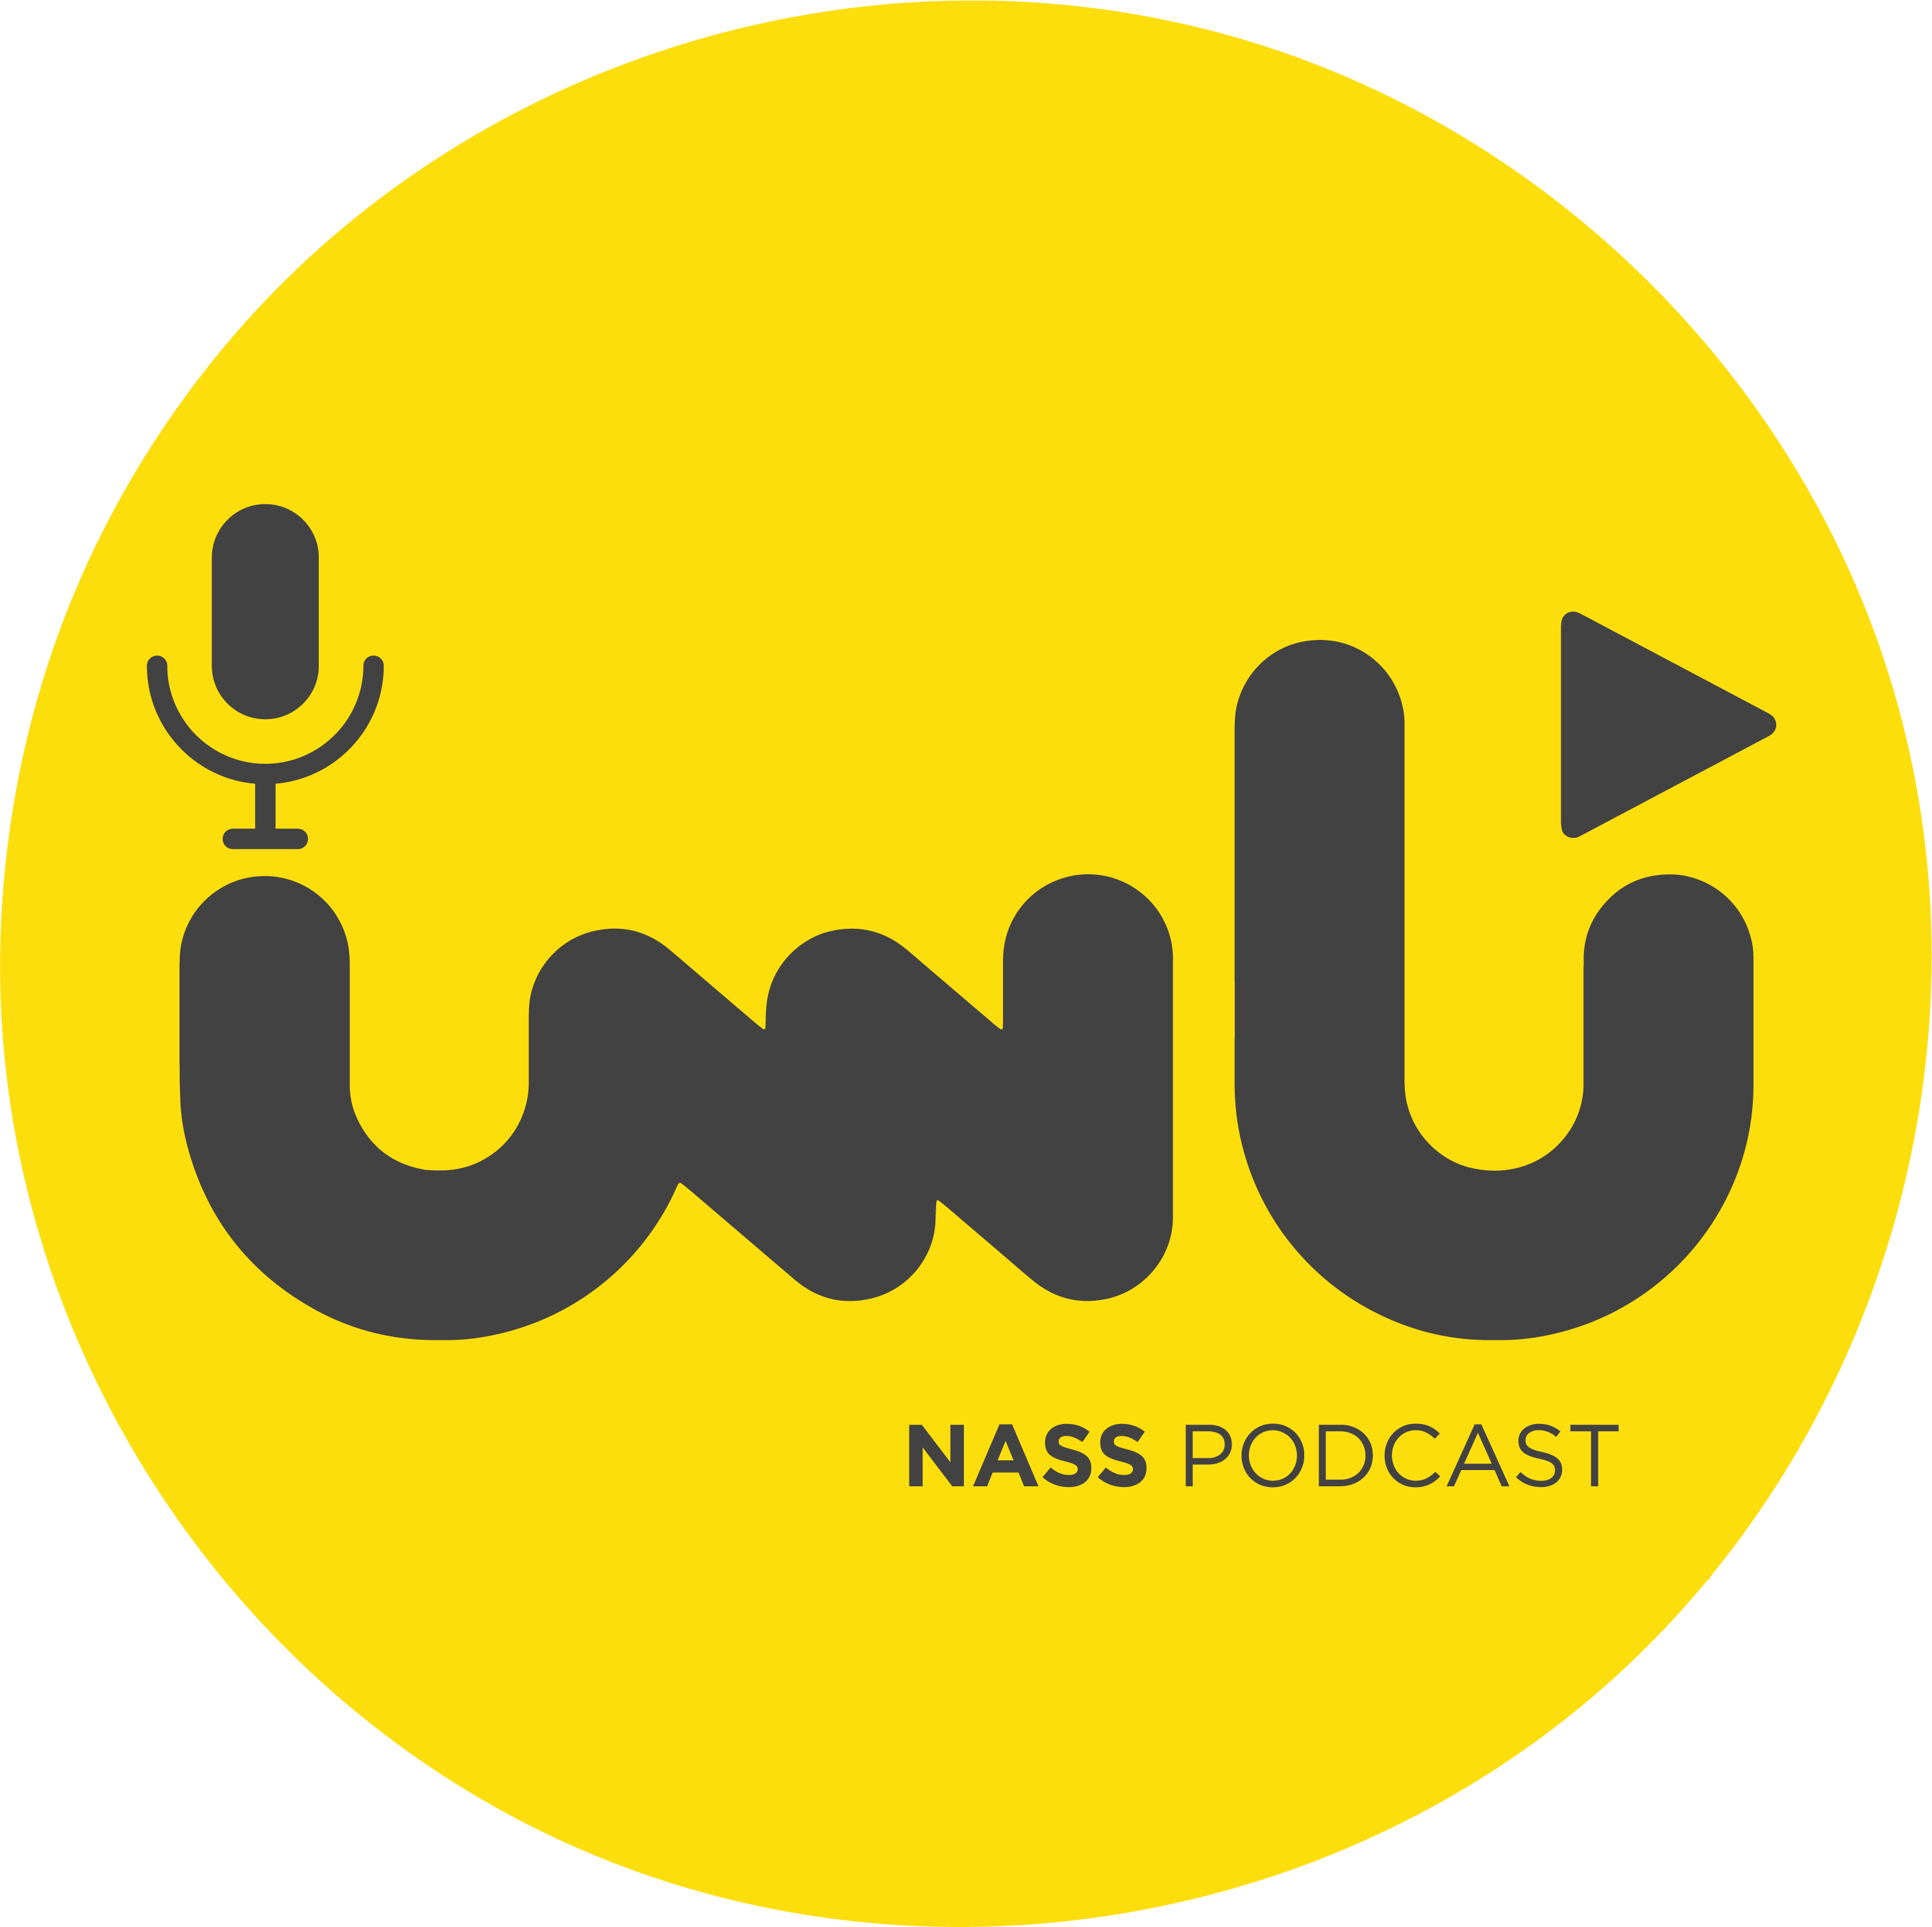 wp-content/uploads/2022/05/Nass-Podcast.png